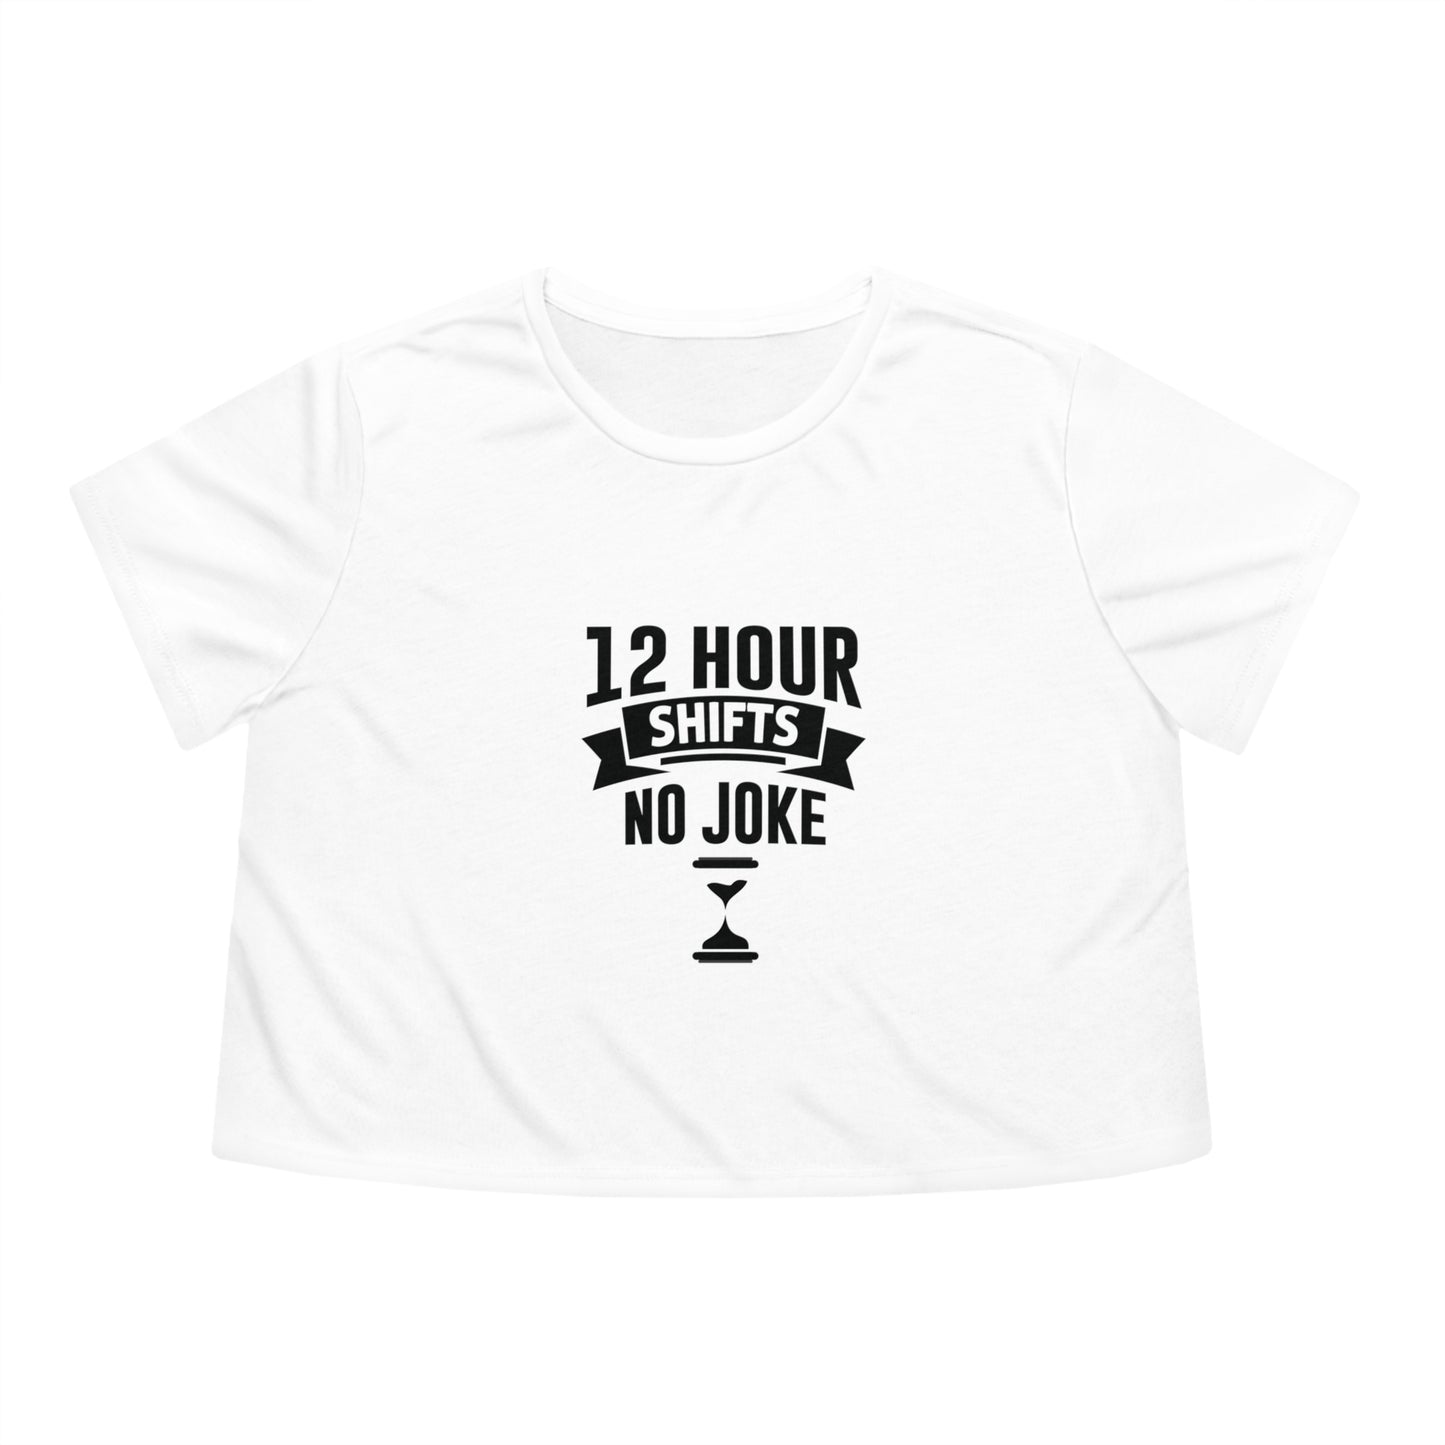 12 Hour Shifts No Joke Women's Flowy Cropped Tee, Doctor shirts, Doctor gift ideas, New Doctor shirt, gift for doctors, Doctor team shirt